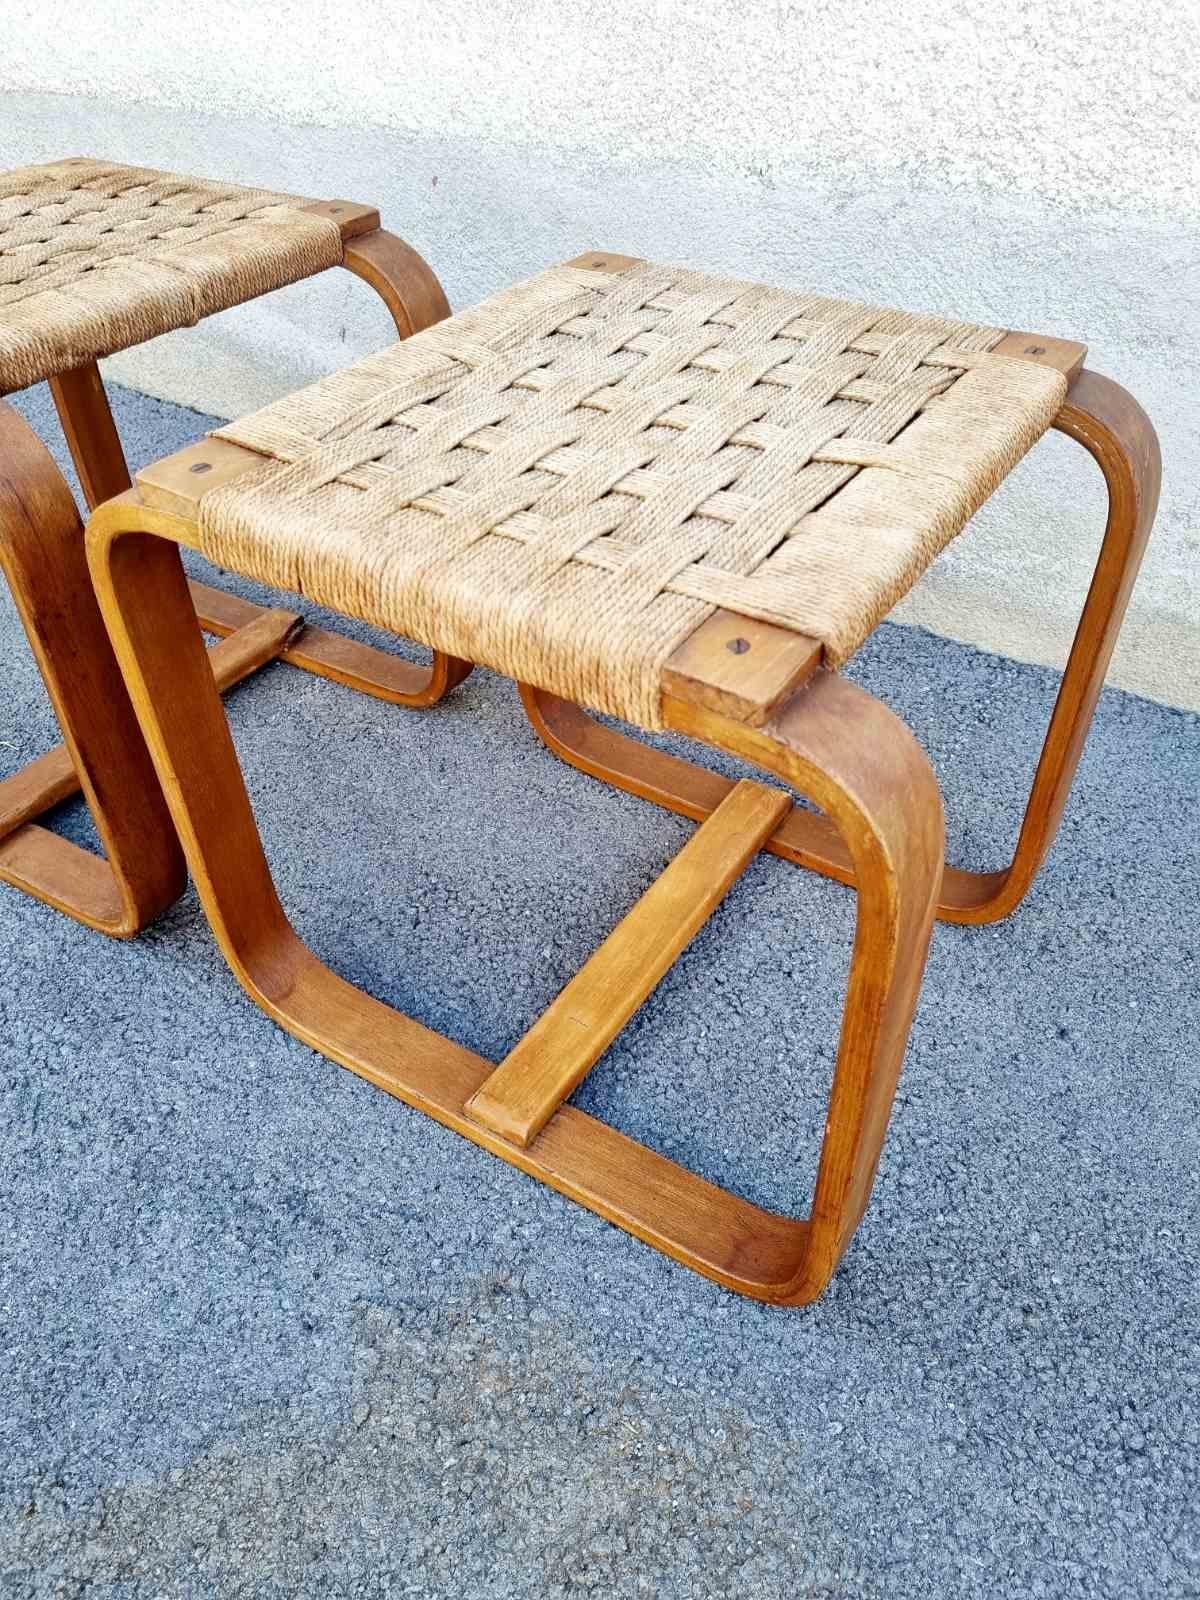 Rare Pair of Stools by Giuseppe Pagano Pogatschnig for Gino Maggioni, Italy 40s For Sale 3